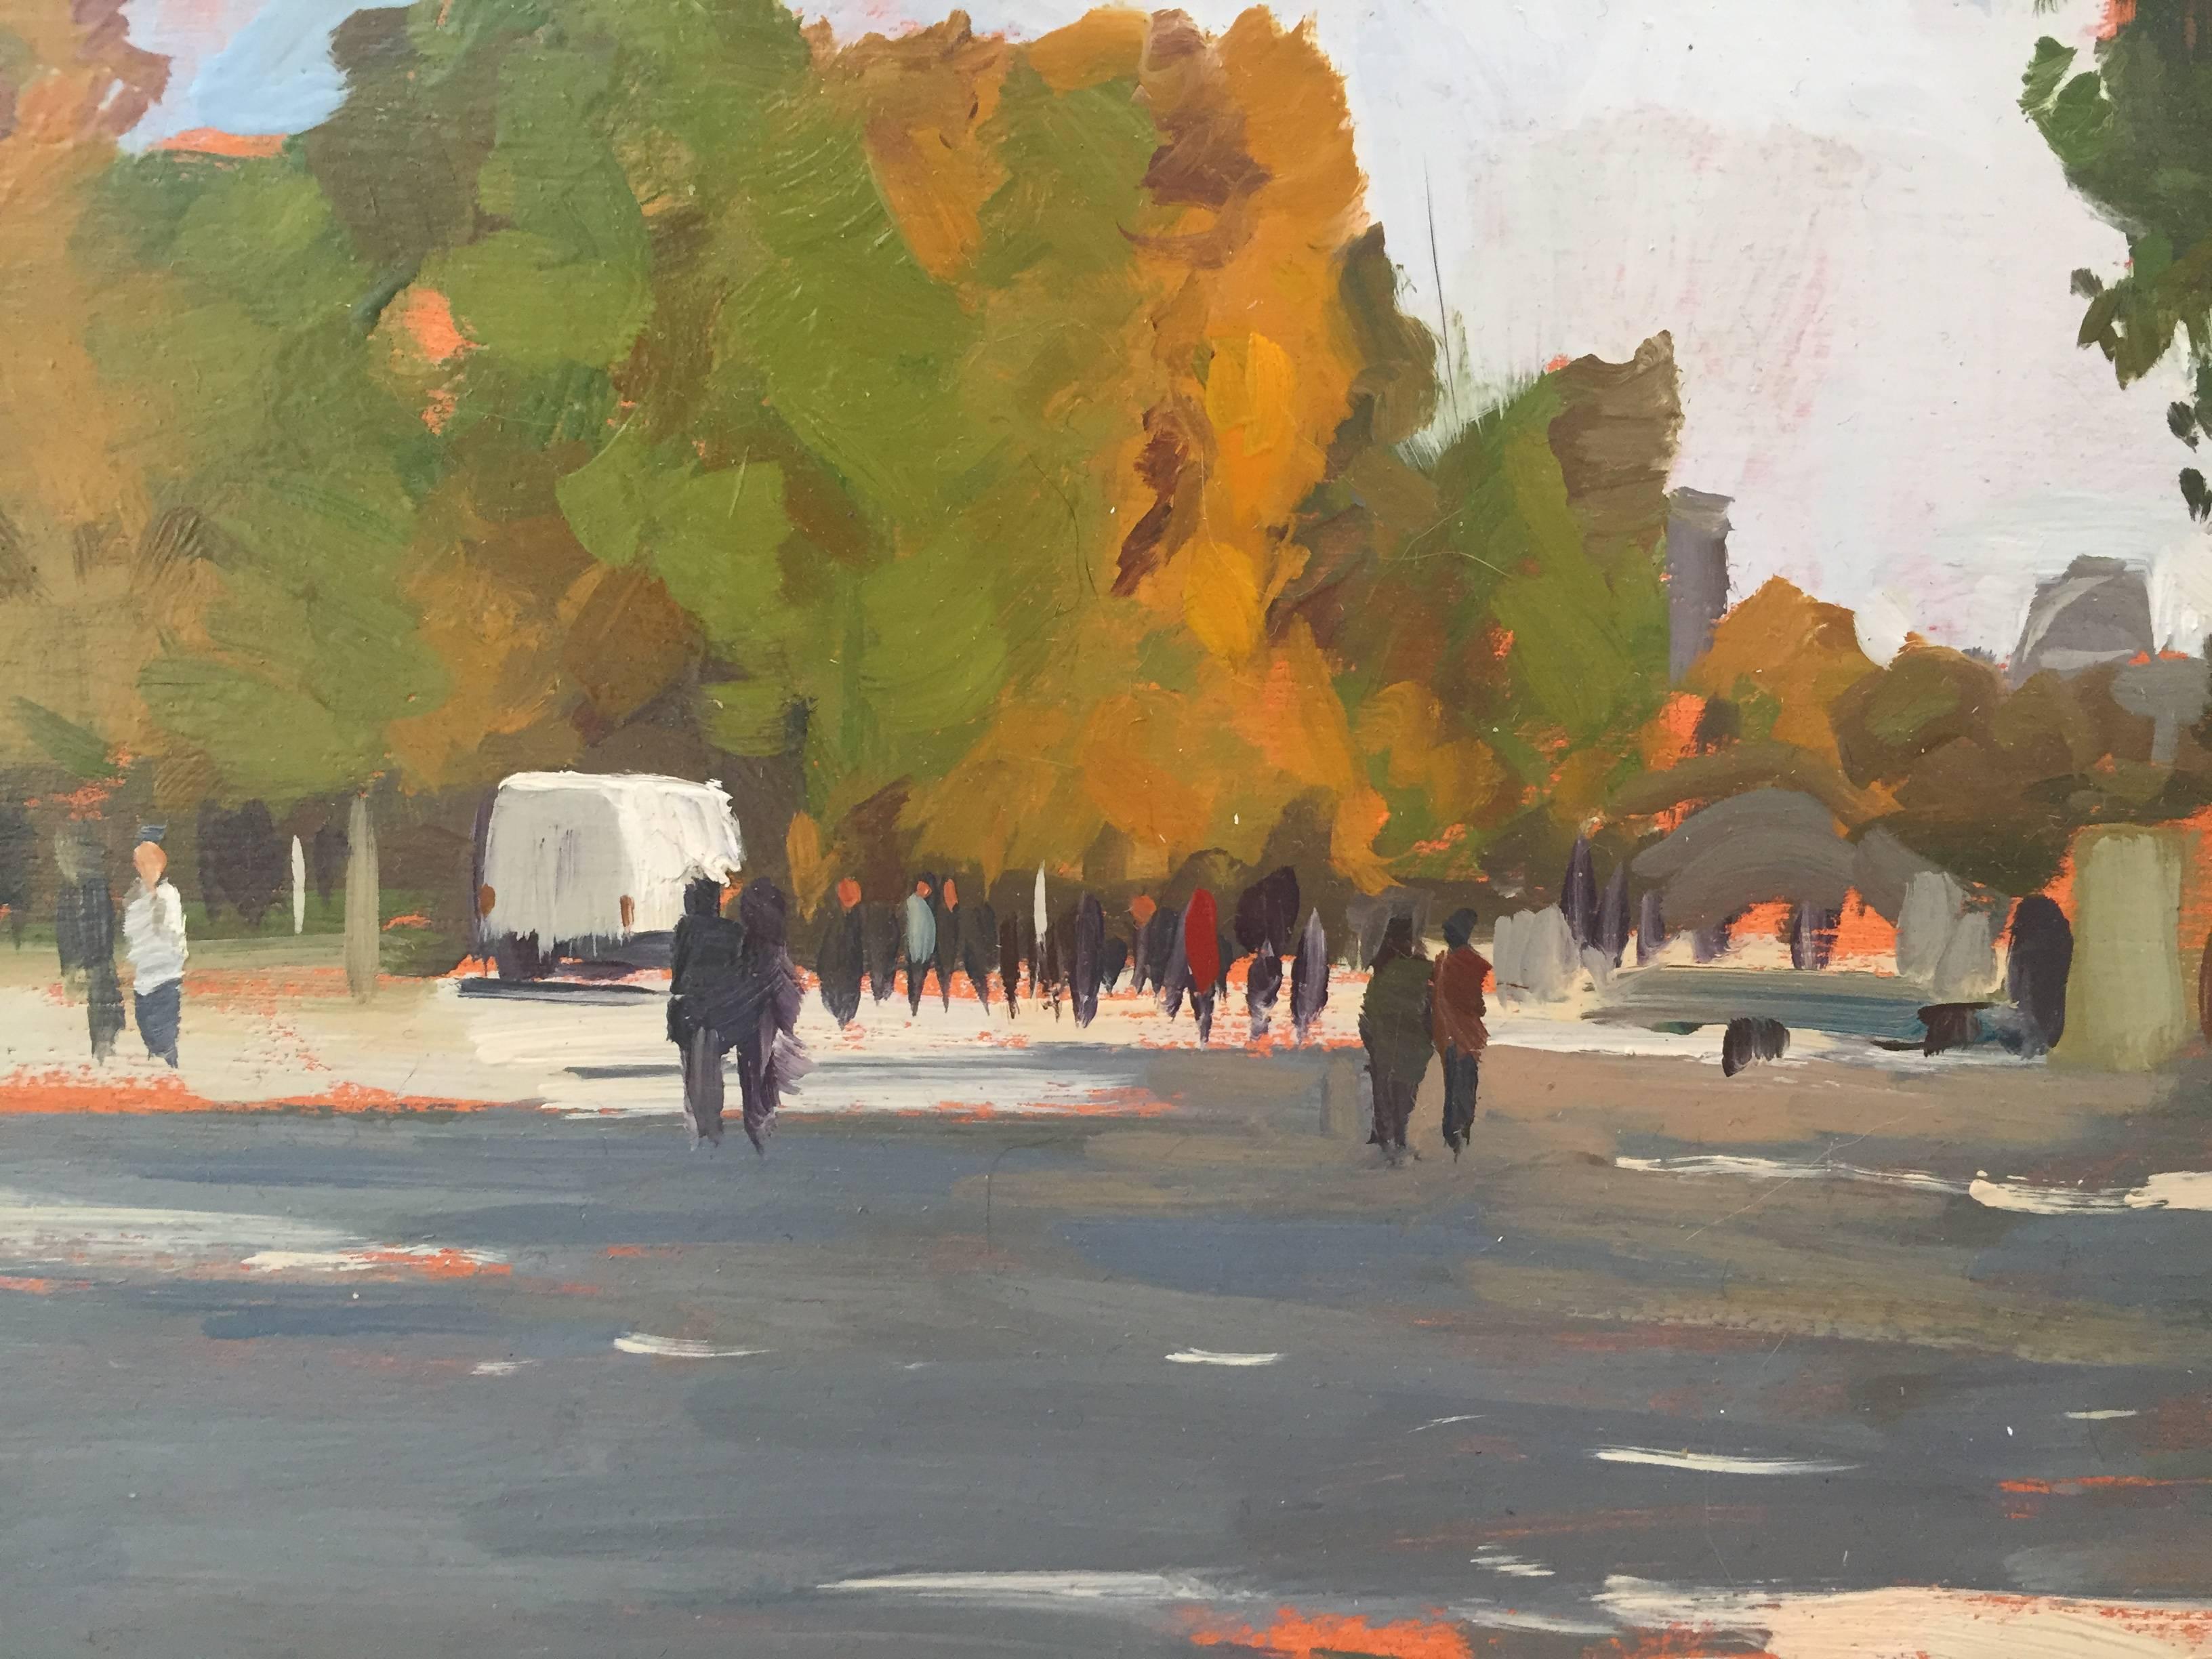 Painted en plein air in the Tuileries Garden in Paris, France. Large, full, trees line the expanse between the Louvre Museum and the Place de la Concorde. Figures walk through the shaded and illuminated path. A work van is parked in the center of